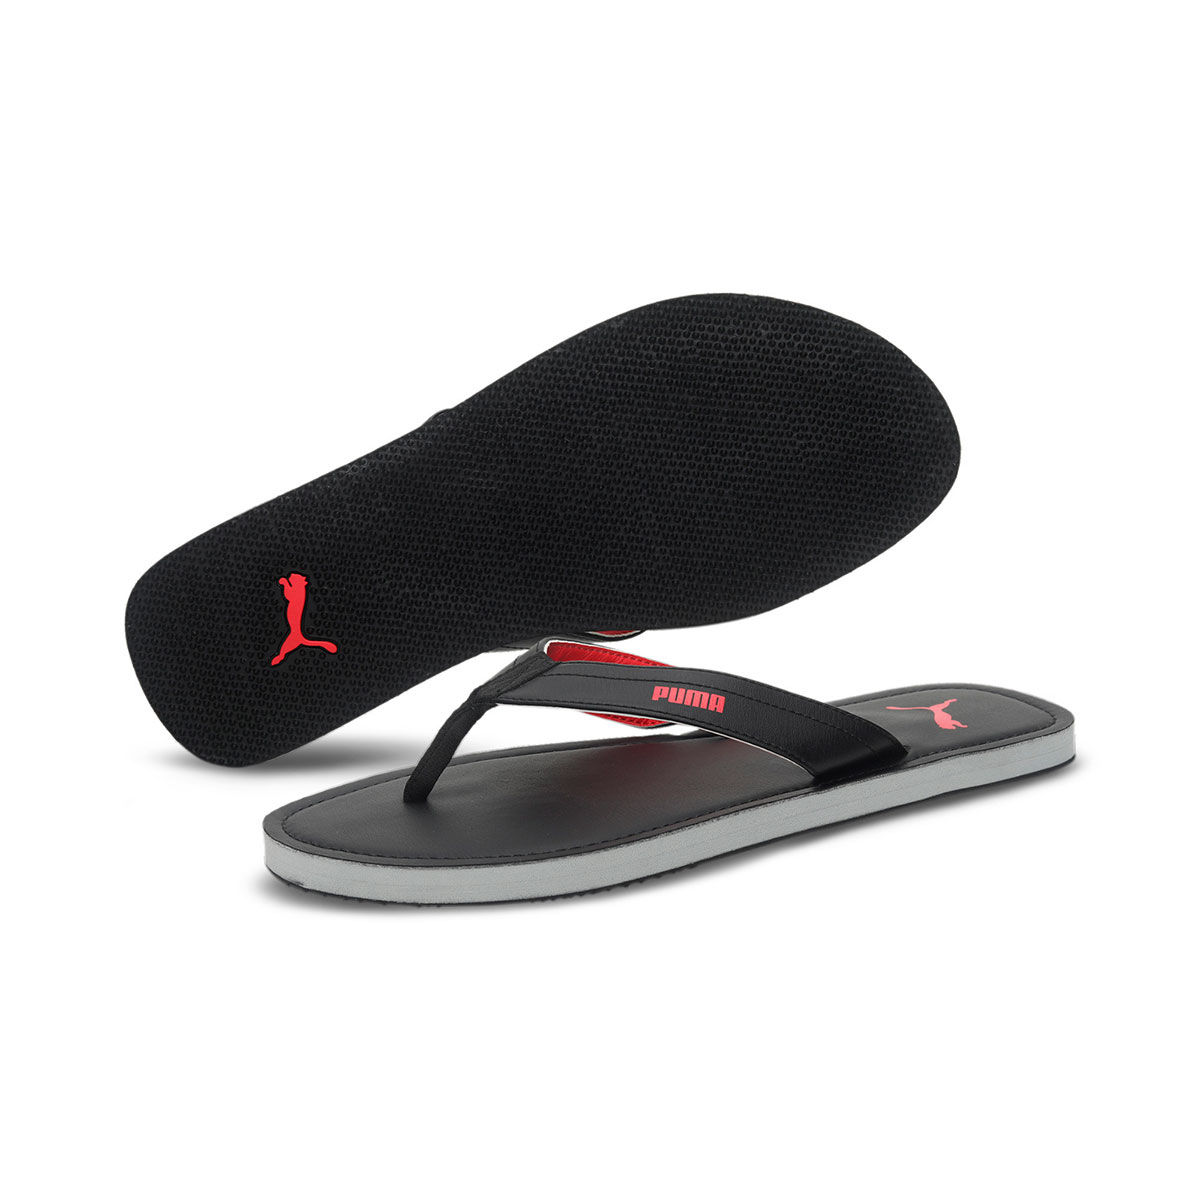 Details more than 222 puma slippers discount